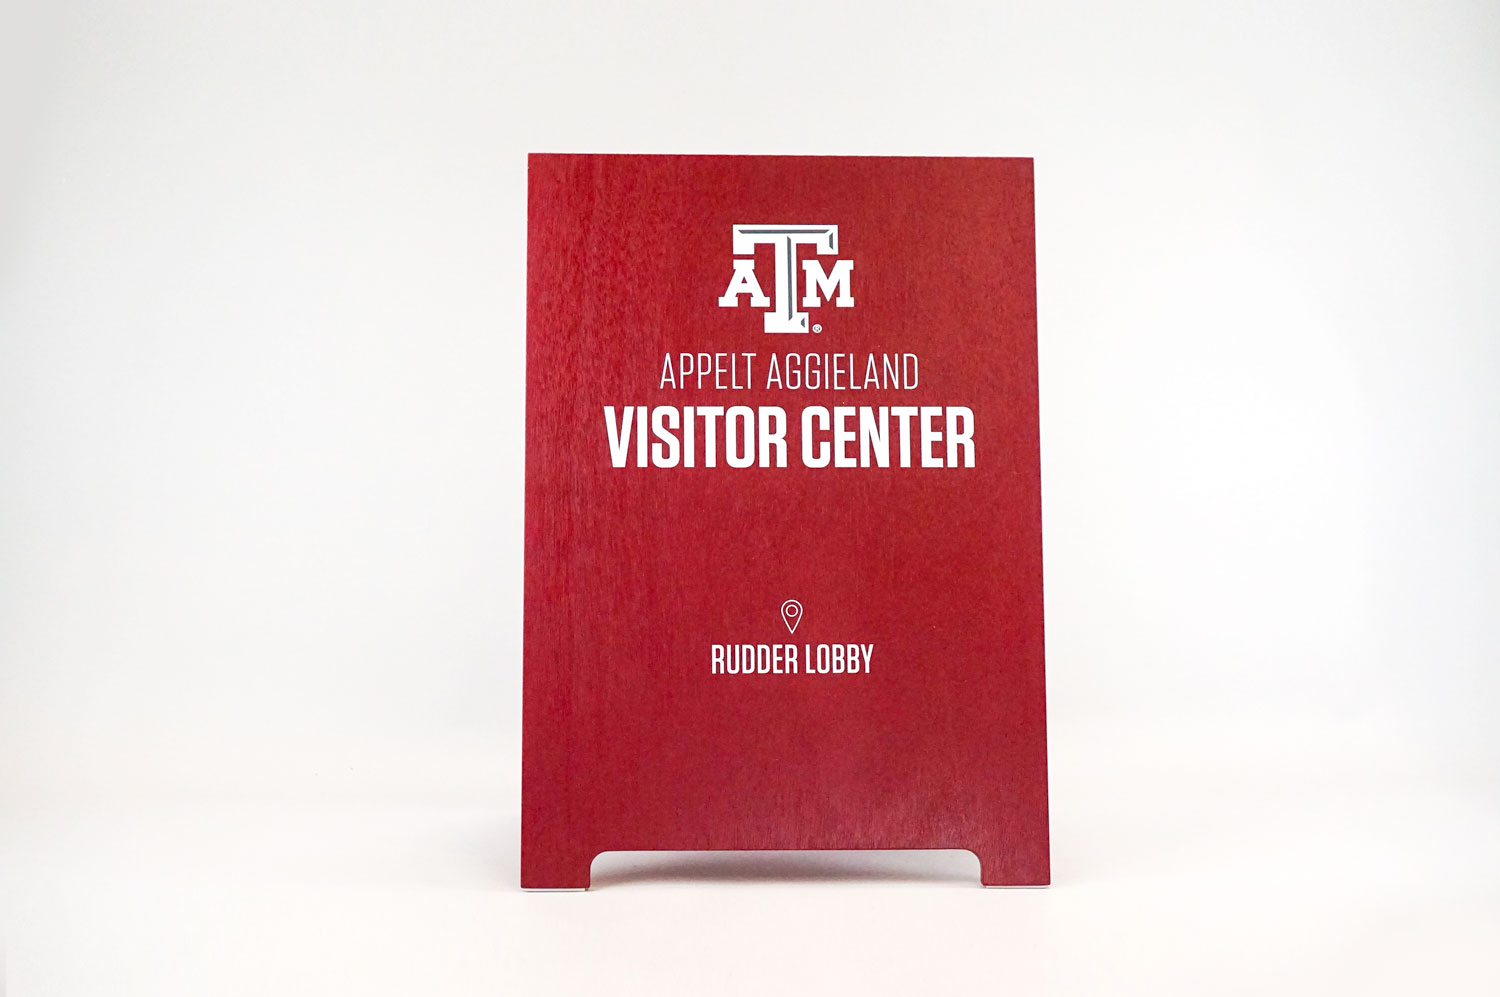 Red A-frame sign with white text for the visitor center at Texas A&M, a public research university in College Station, Texas.